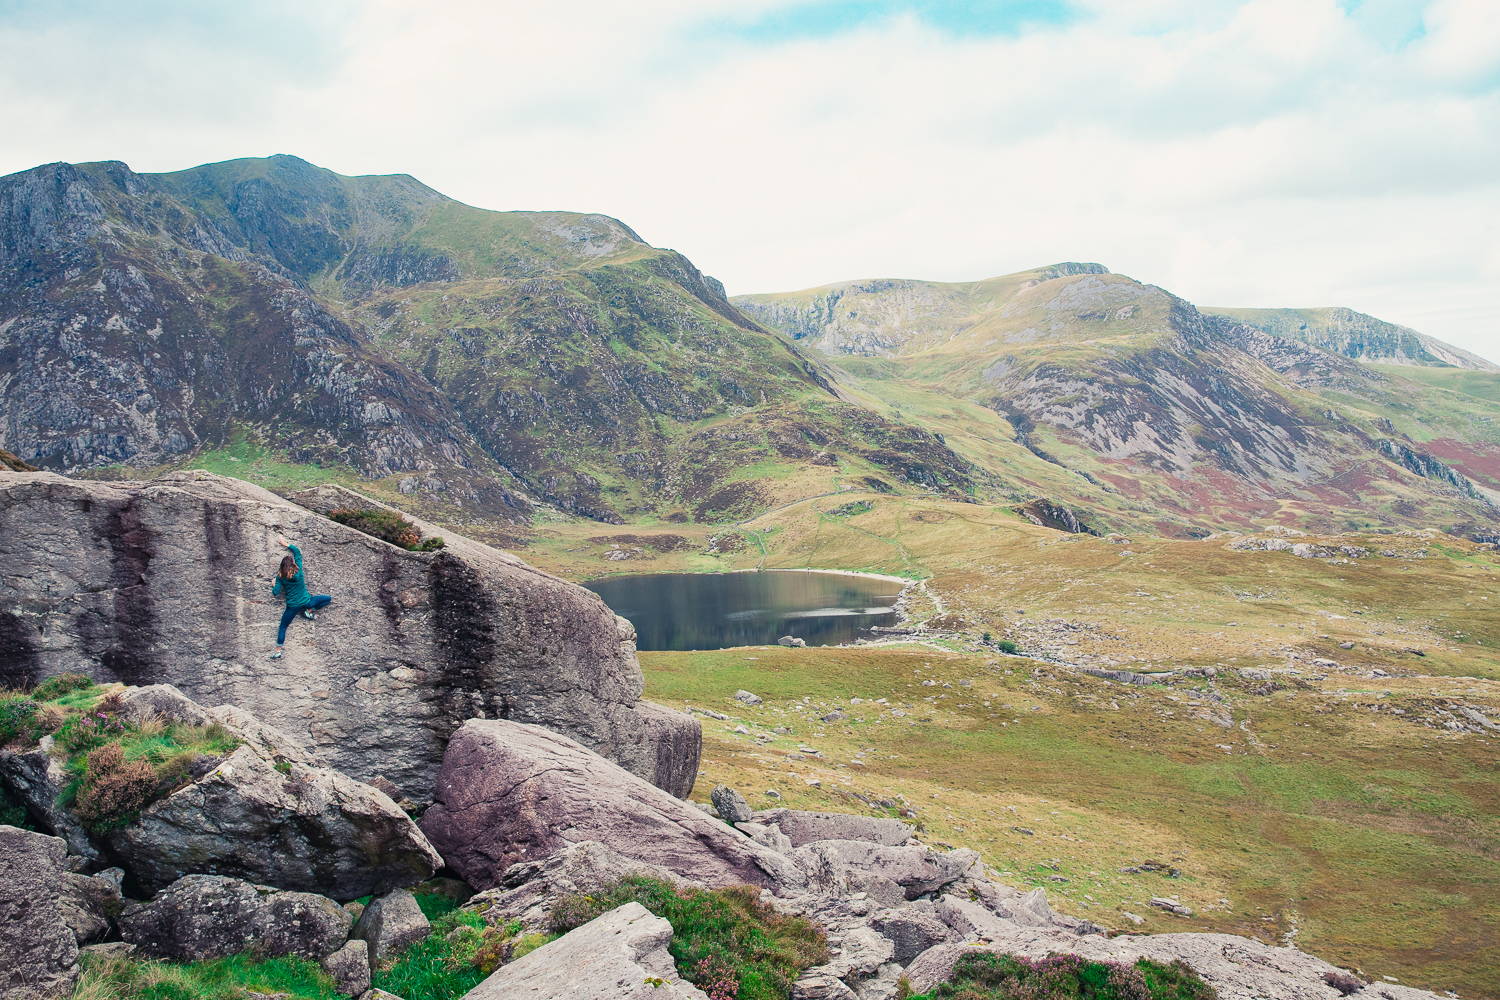 A 3RD ROCK bouldering day out in the gorgeous landscape of Snowdonia...specifically the Llyn Idwal in Ogwen Valley.